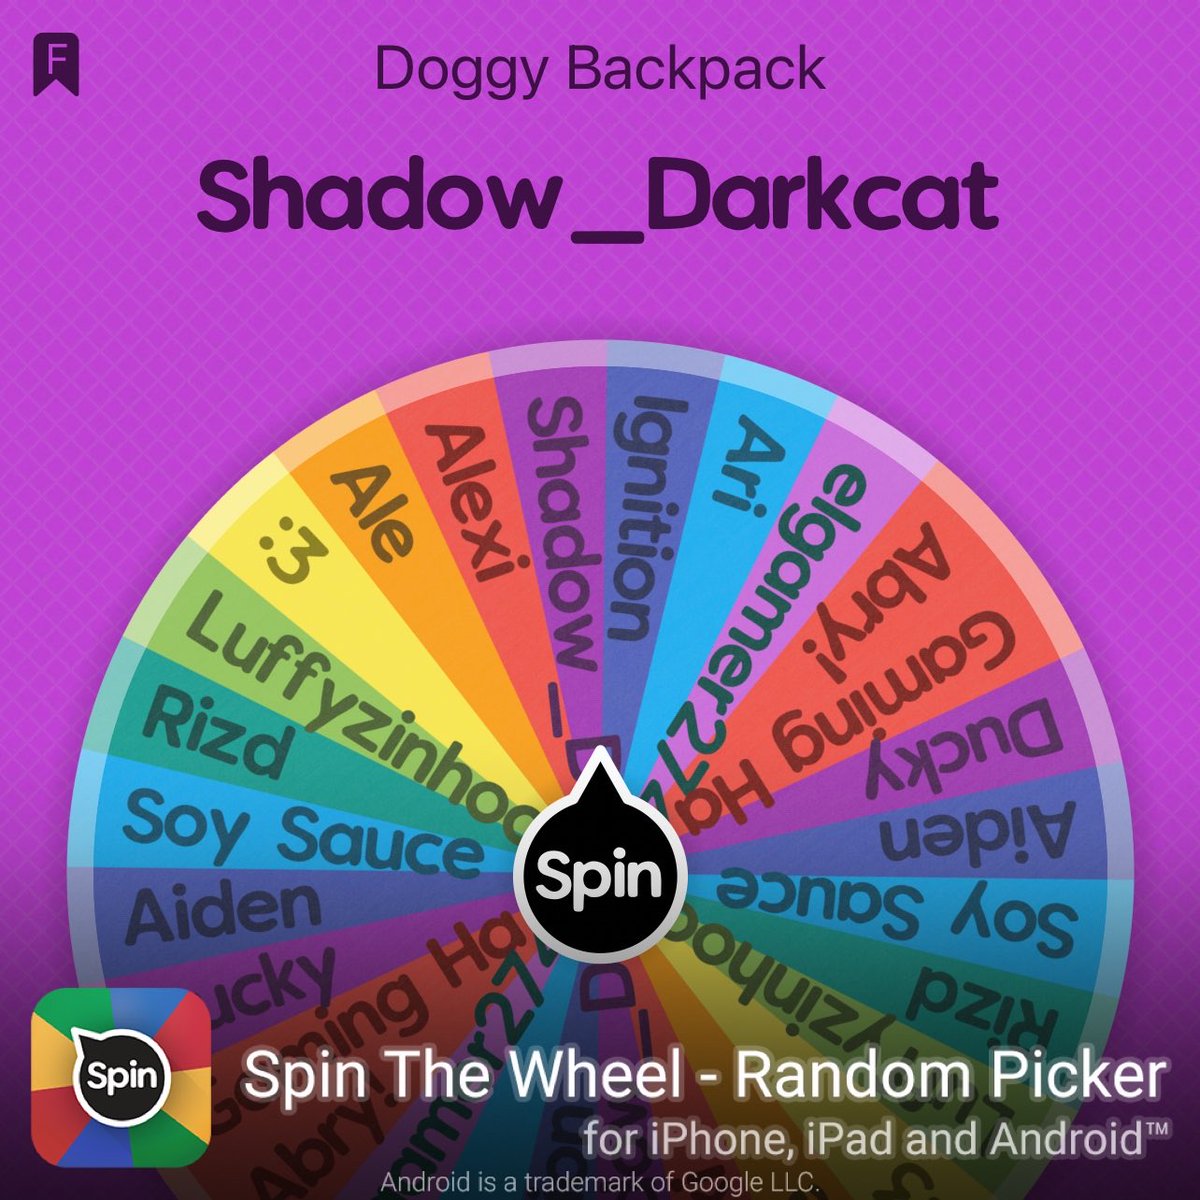 I rolled Shadow_Darkcat in Doggy Backpack! #SpinTheWheelApp #spinthewheel 👉 Winner ⁦@xShadow_Darkcat⁩  dm me in 2hrs time or re roll/spin‼️